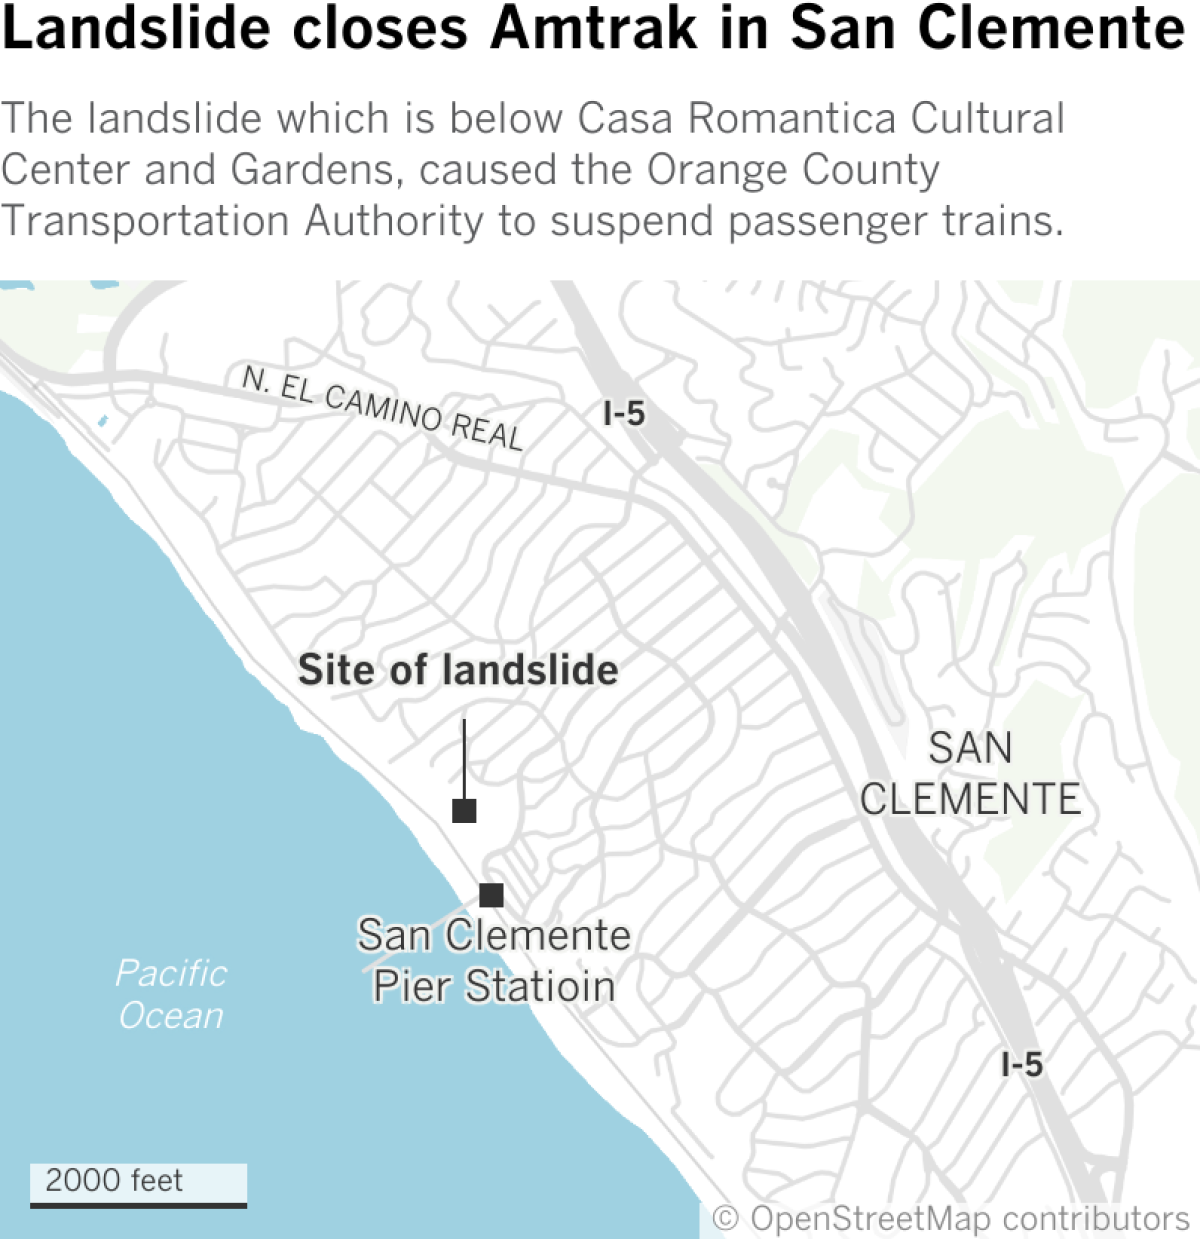 The landslide which is below Casa Romantica Cultural Center and Gardens, caused the Orange County Transportation Authority to suspend passenger trains. 